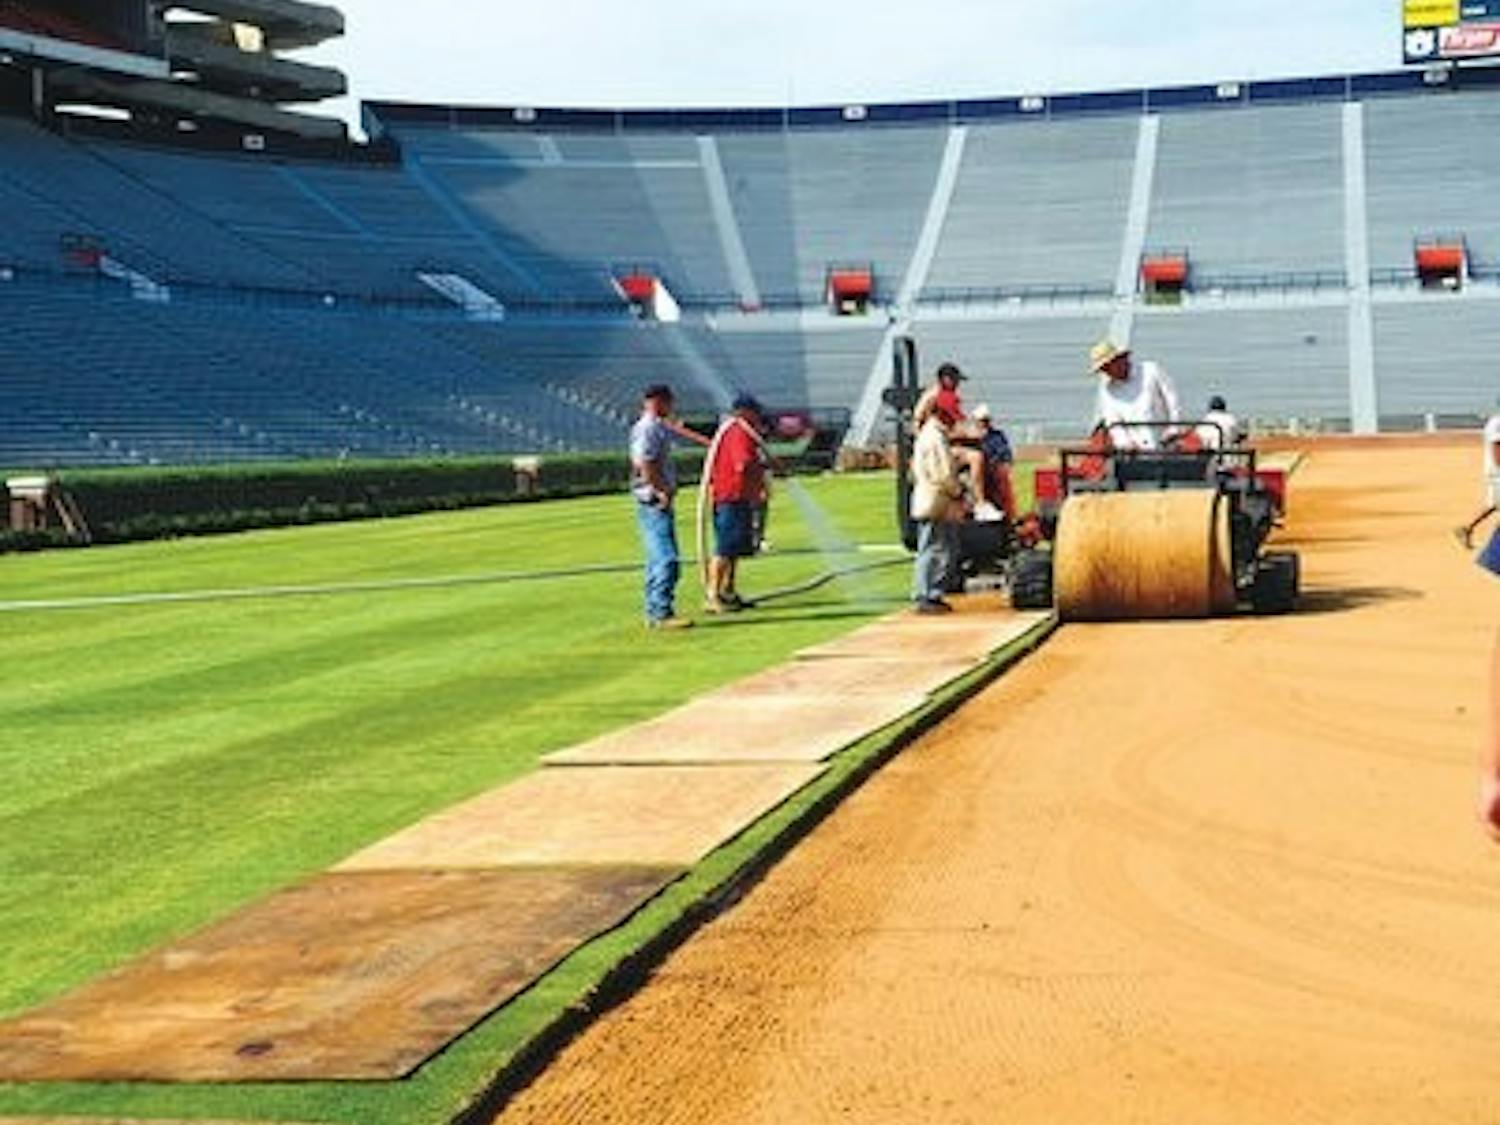 Workers placed Tifway sod on Pat Dye Field Tuesday.